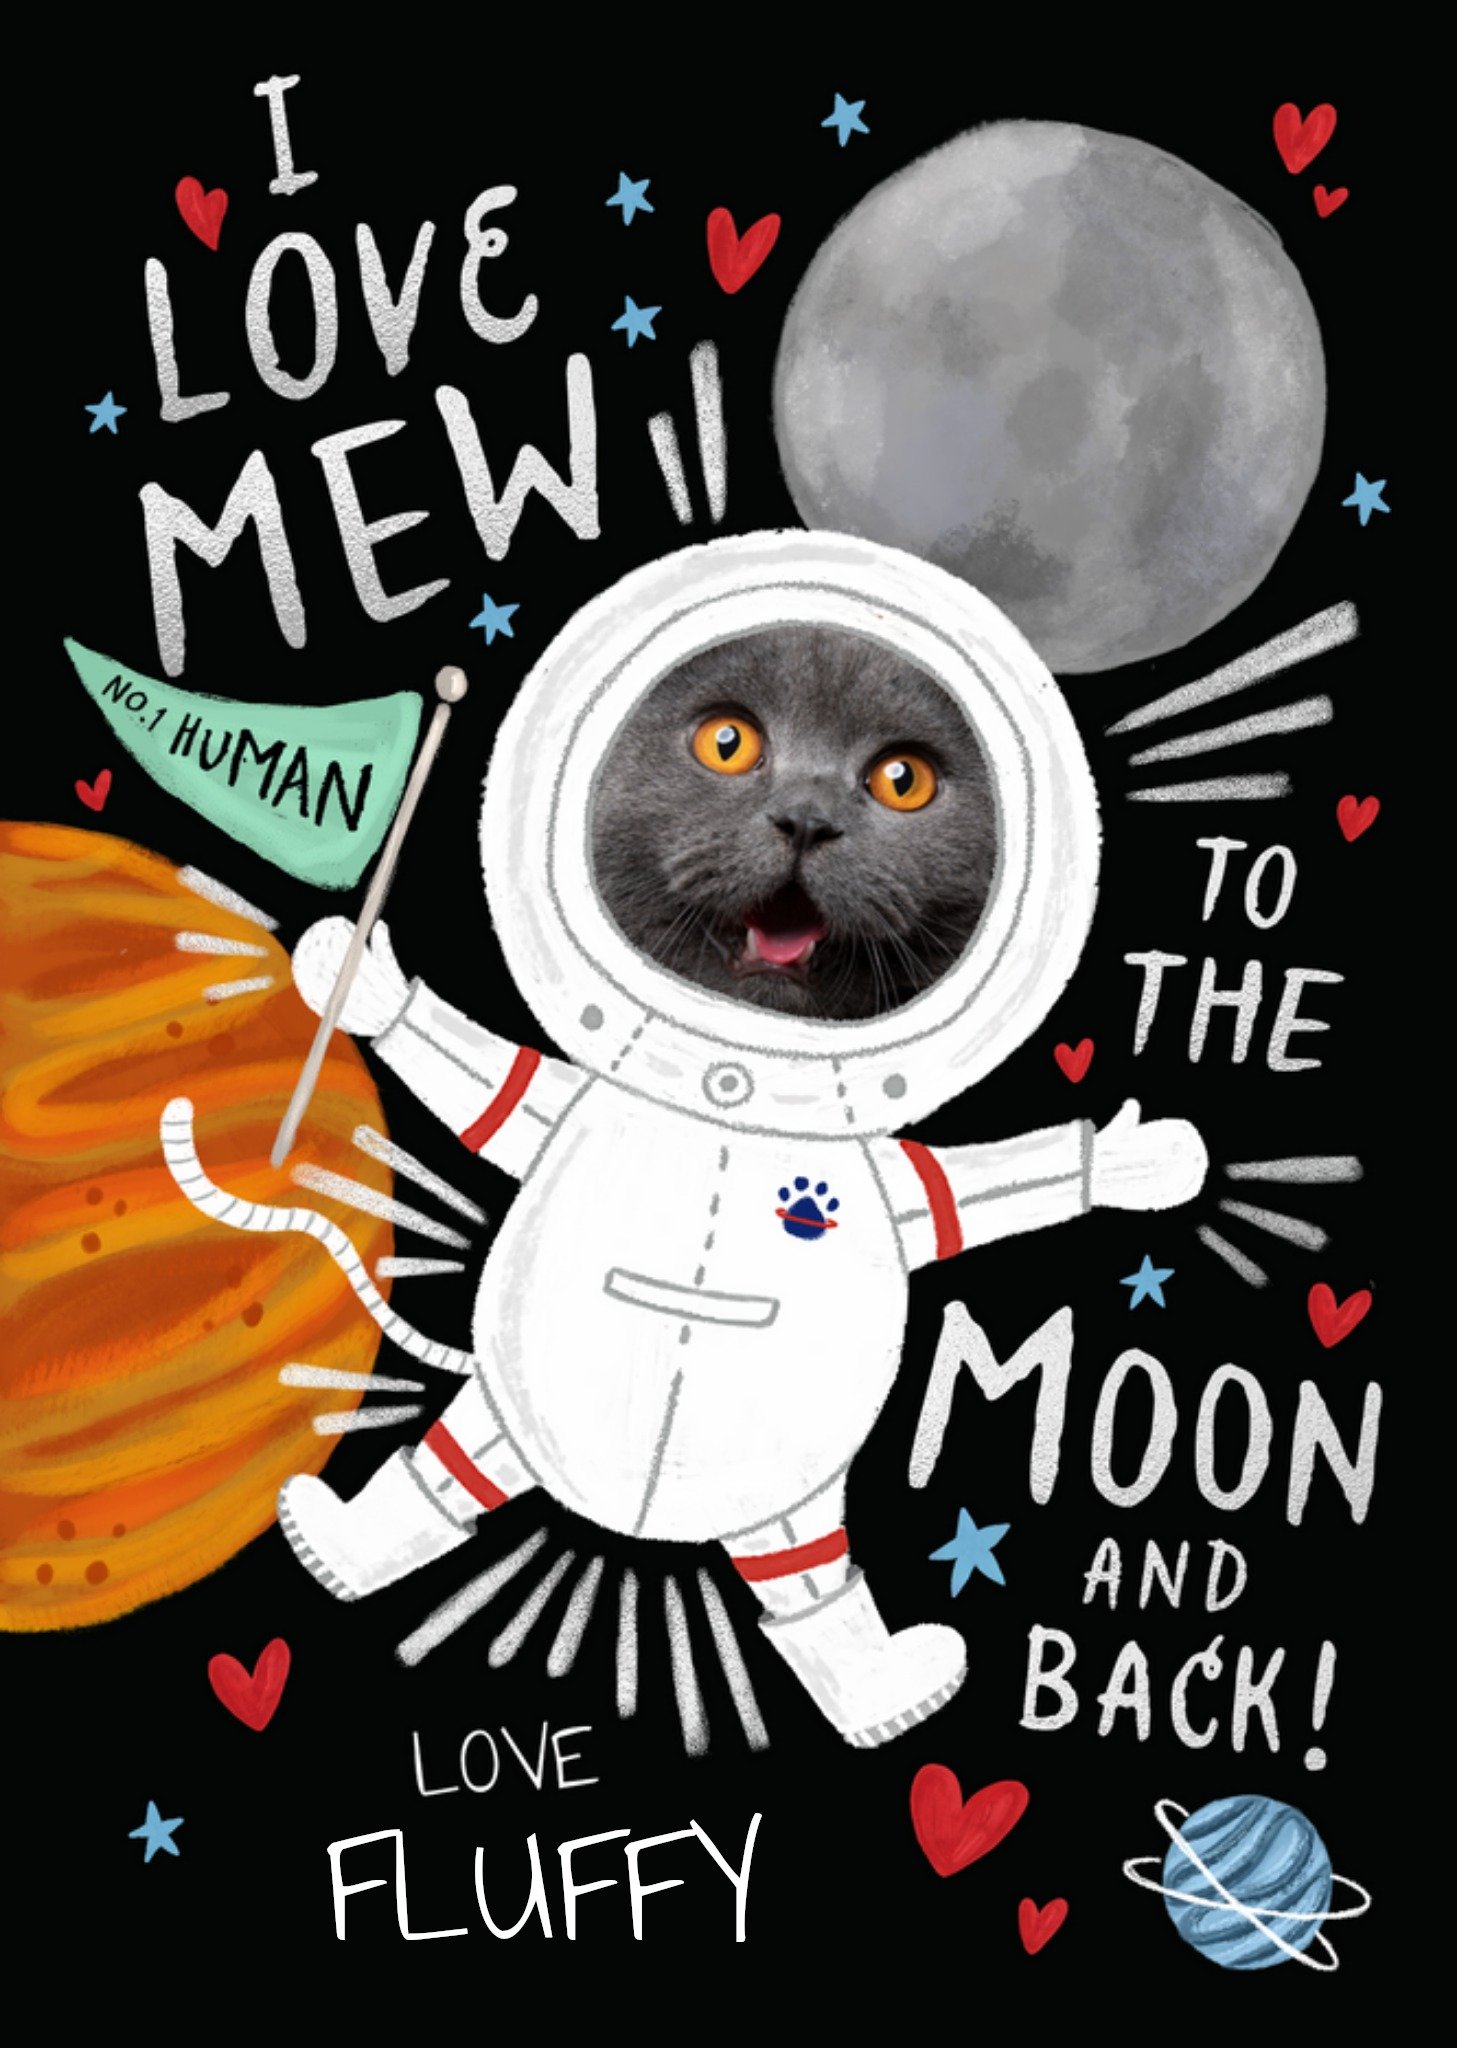 Moonpig I Love Mew To The Moon And Back Photo Upload From The Cat Card Ecard